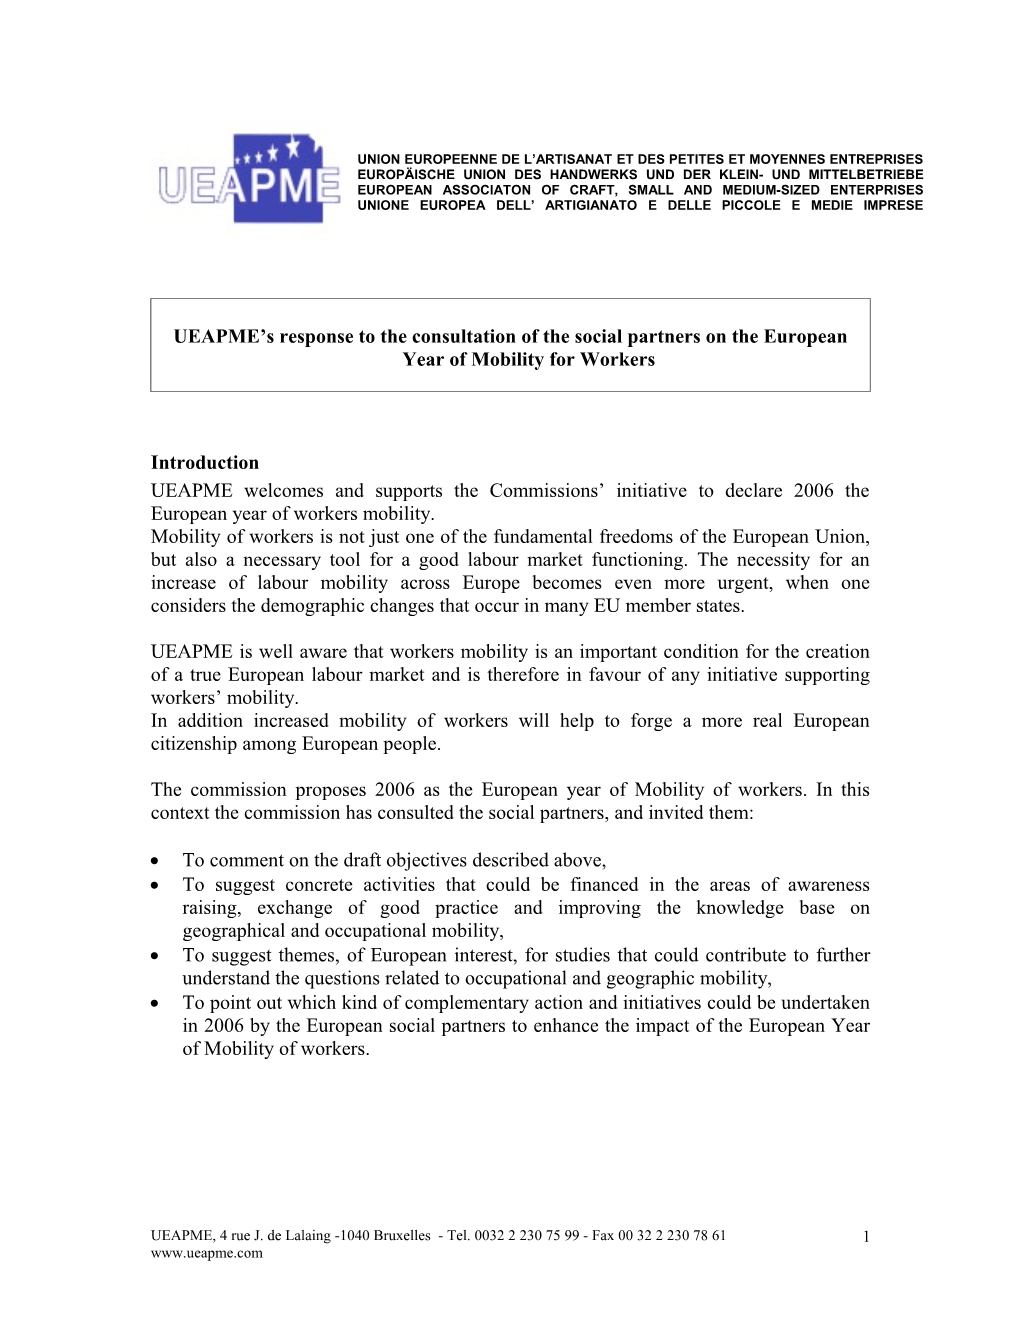 UEAPME S Position Paper on the Current State of Play of the Proposed Directive on Professional